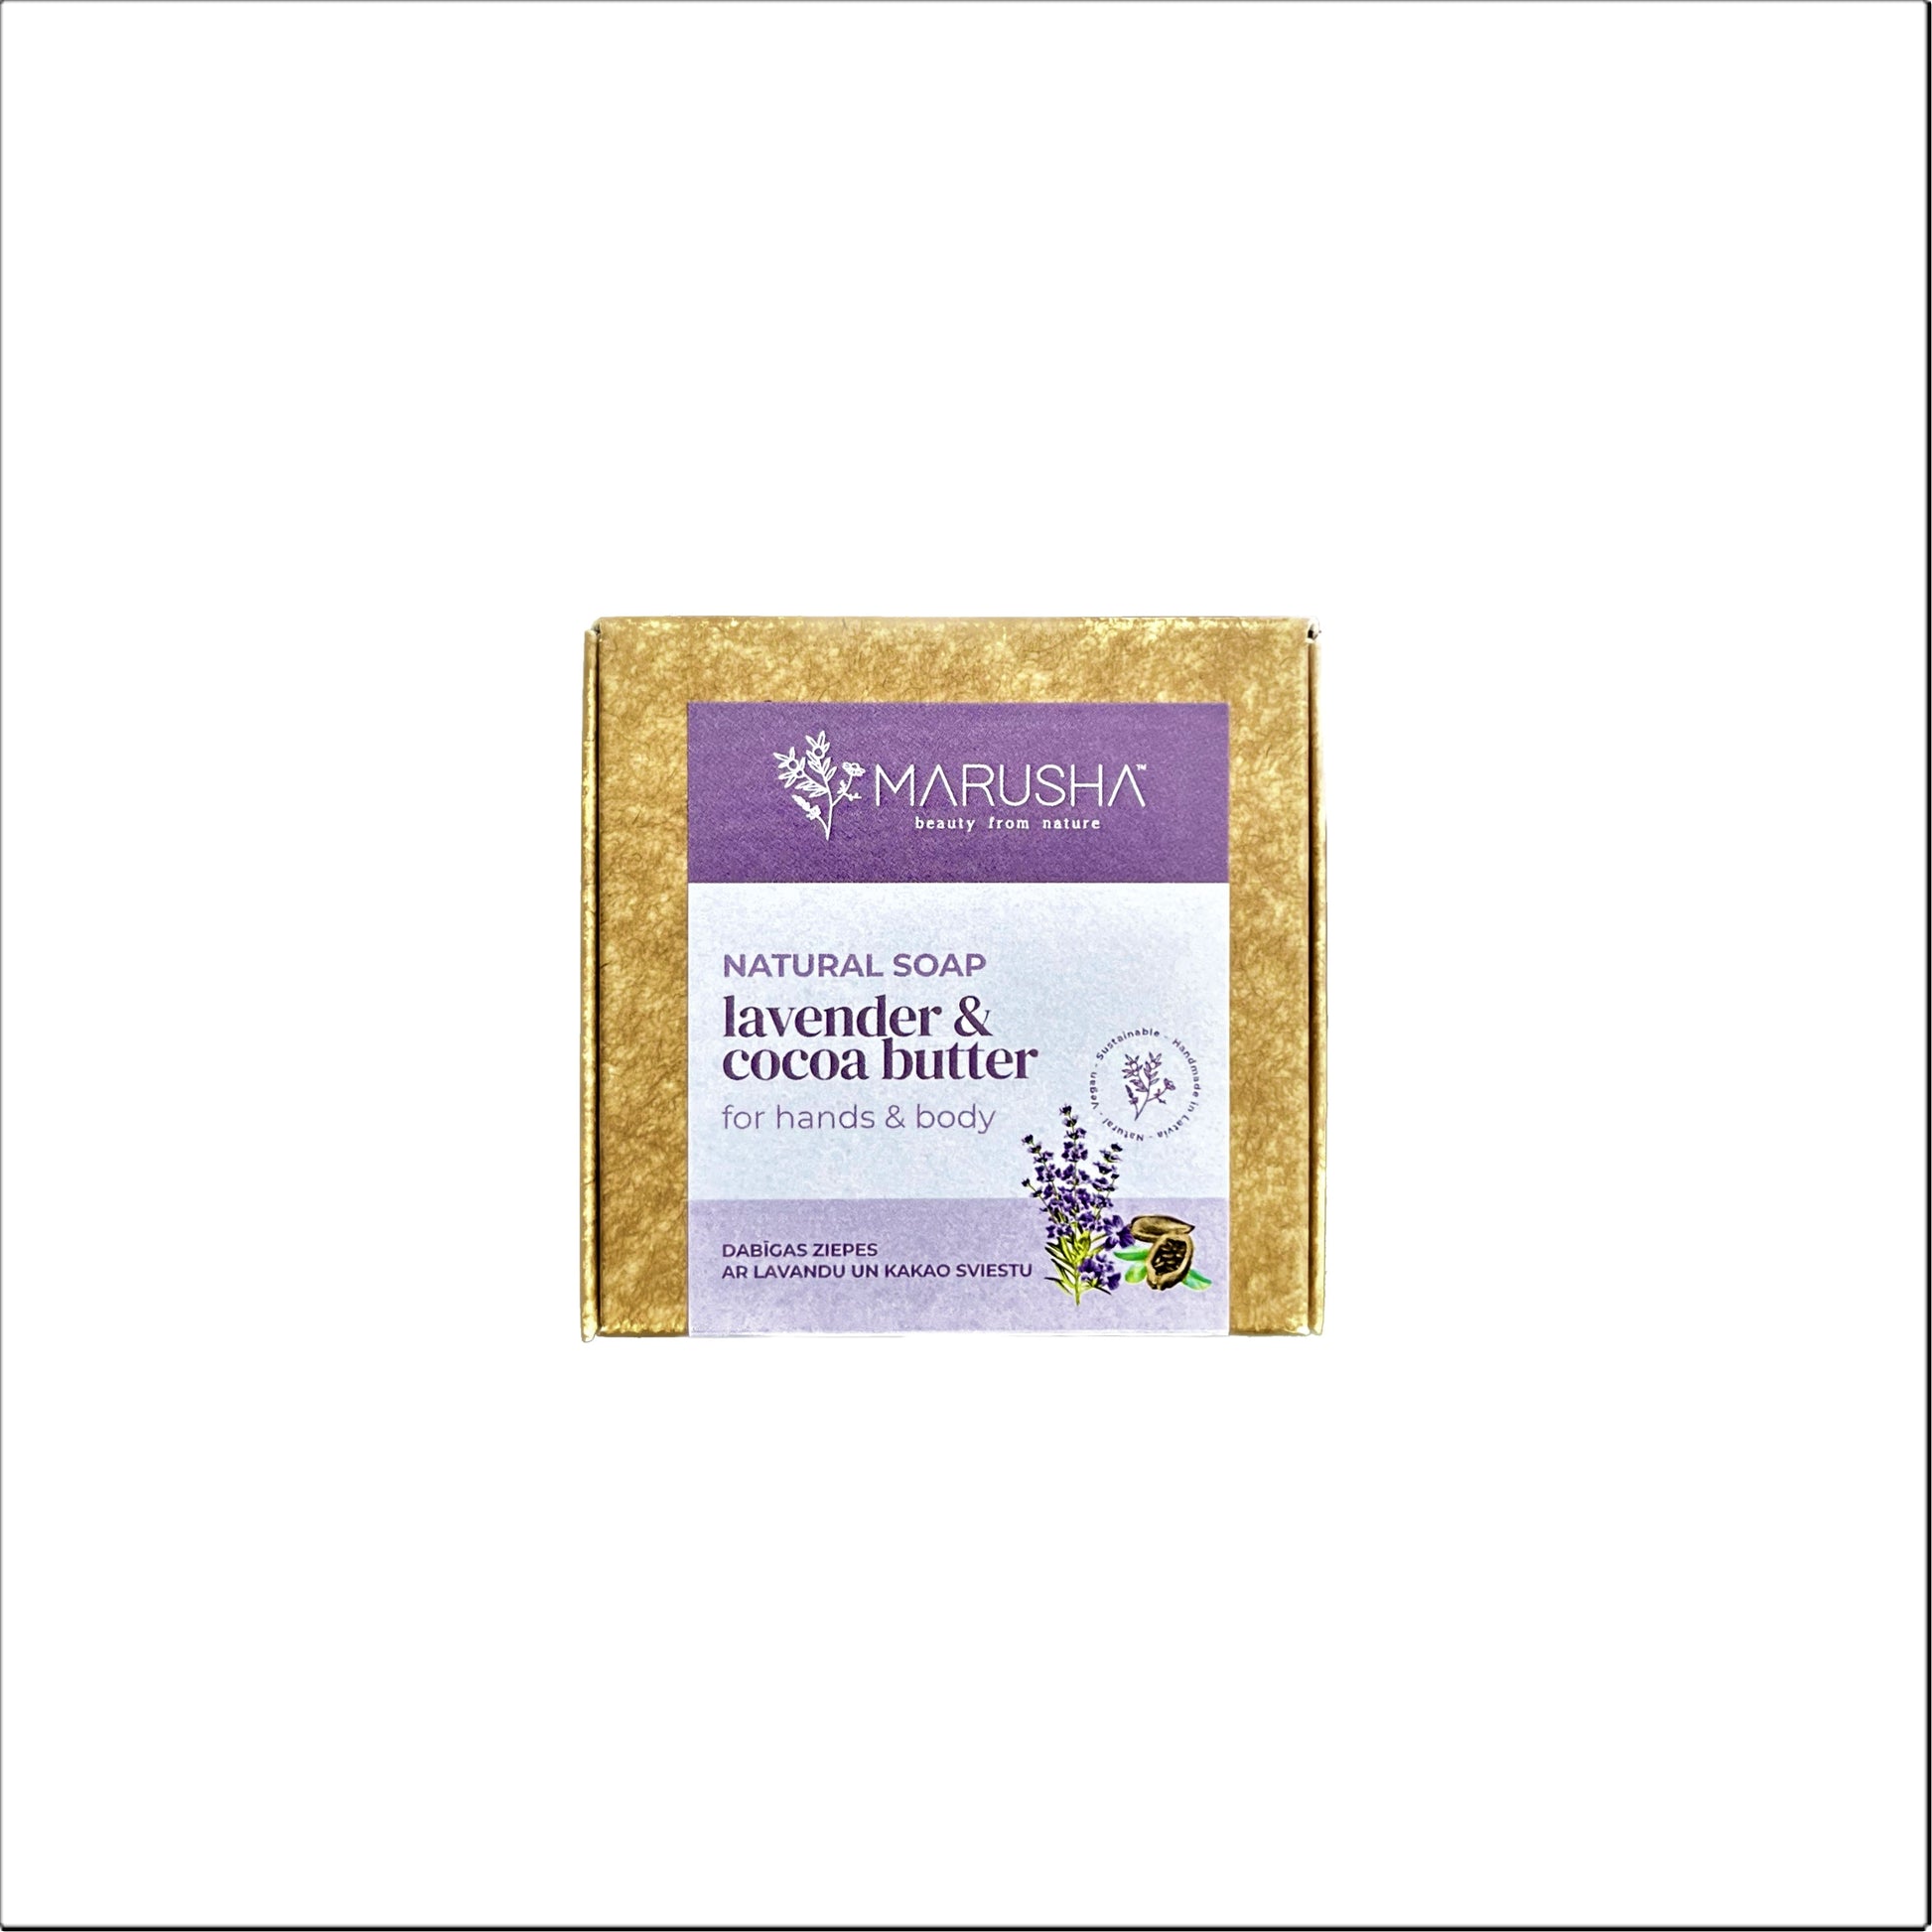 Marusha Natural soap with Lavender